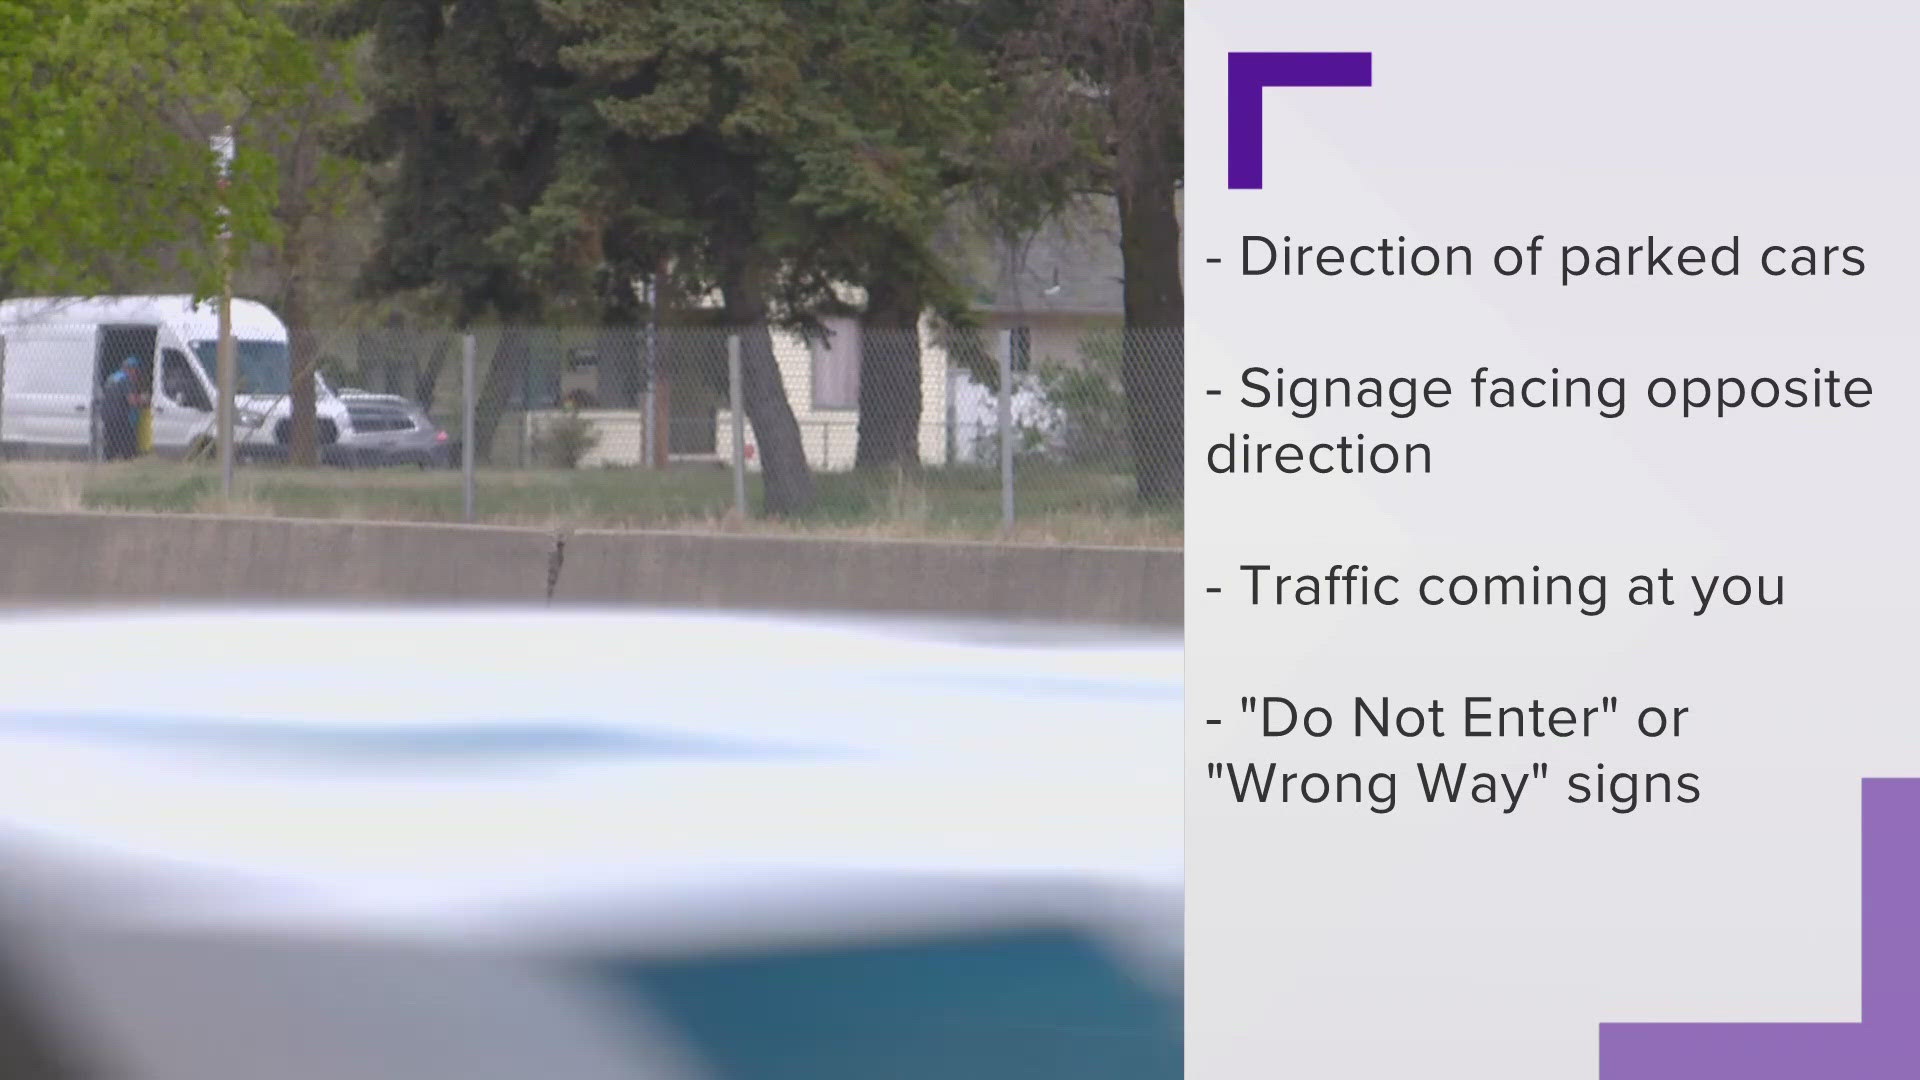 Following a deadly head-on crash, KREM 2 asked Washington State Patrol what to do if you encounter a wrong-way driver and how to tell if you're going the wrong way.